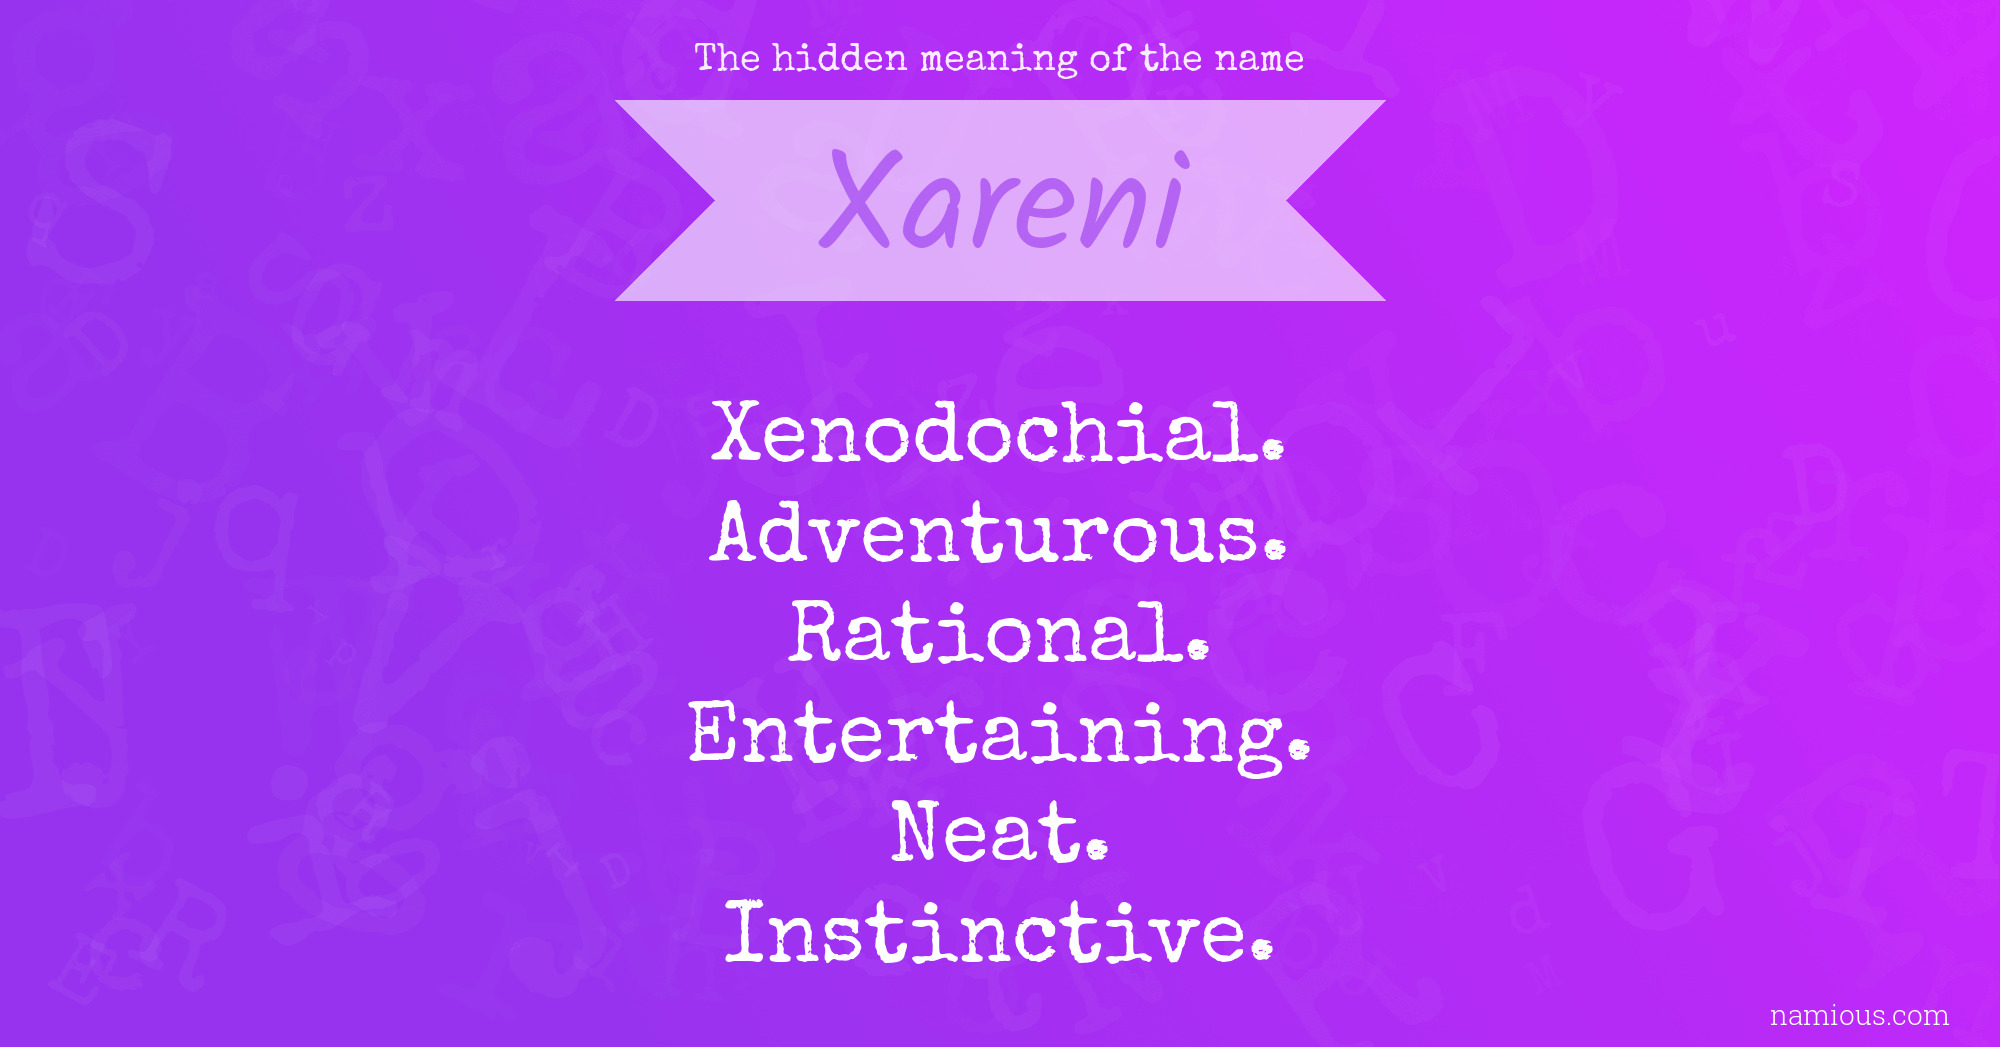 The hidden meaning of the name Xareni